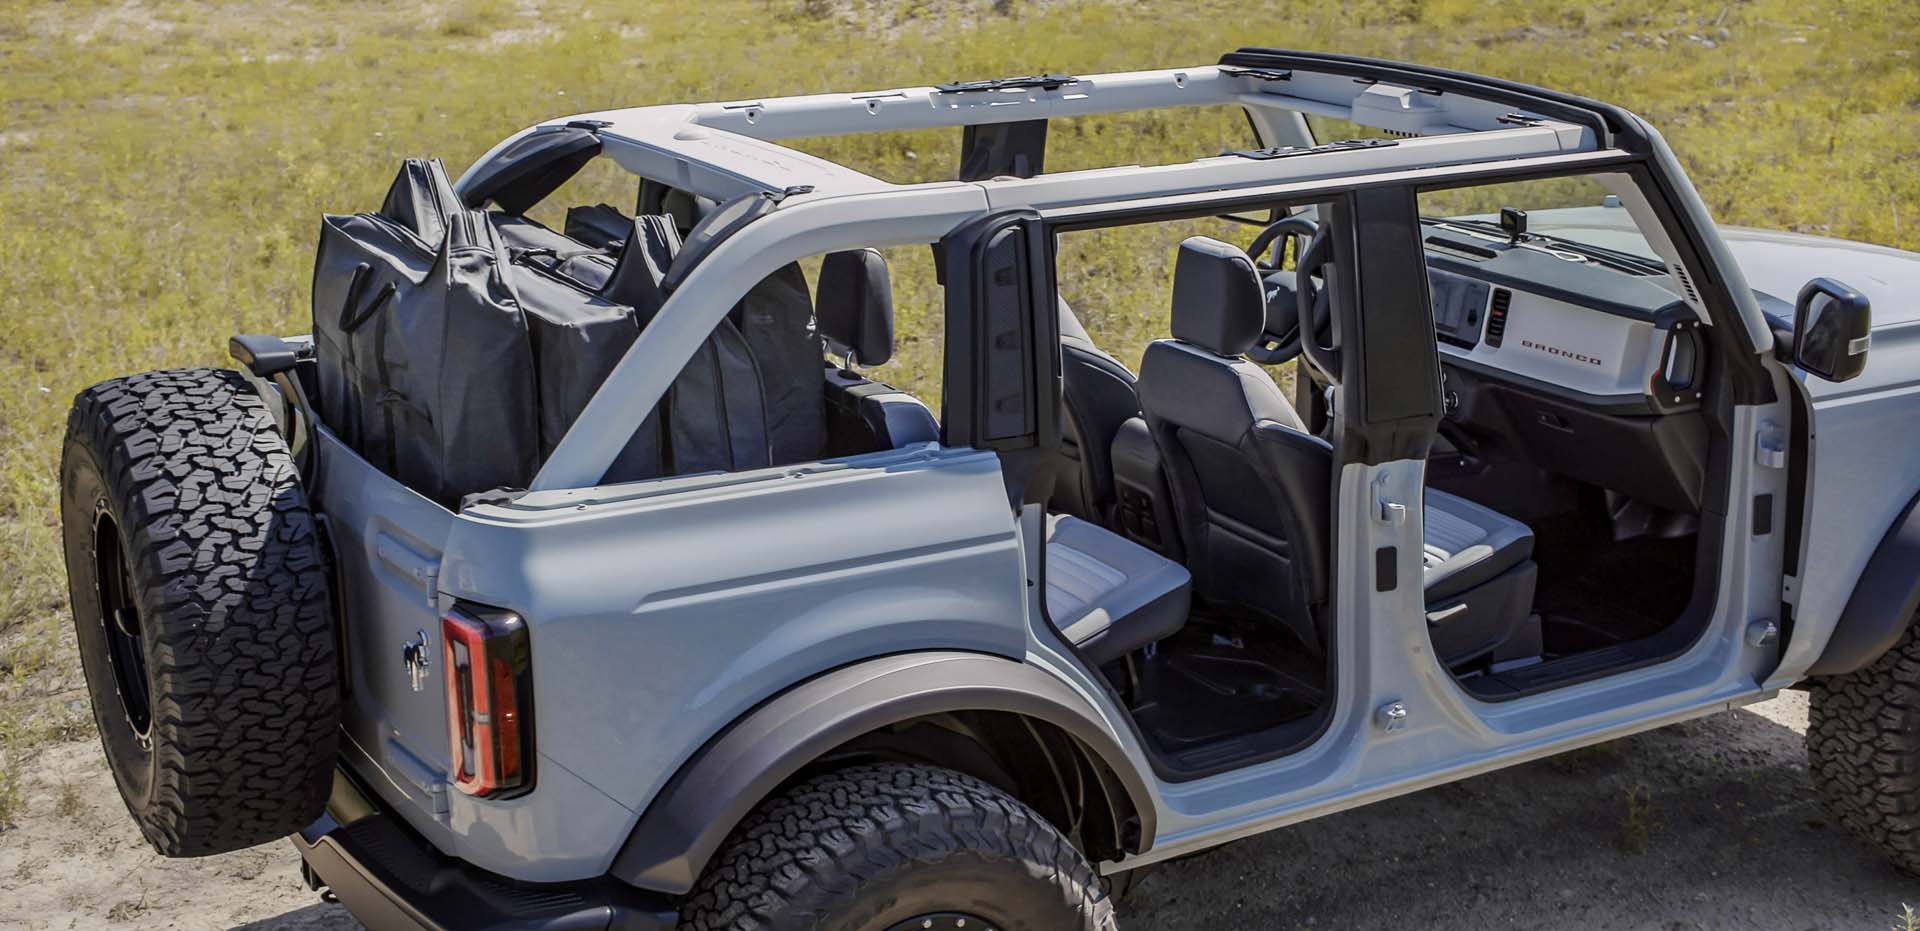 2021 Ford Bronco guide: How to remove the doors and roof